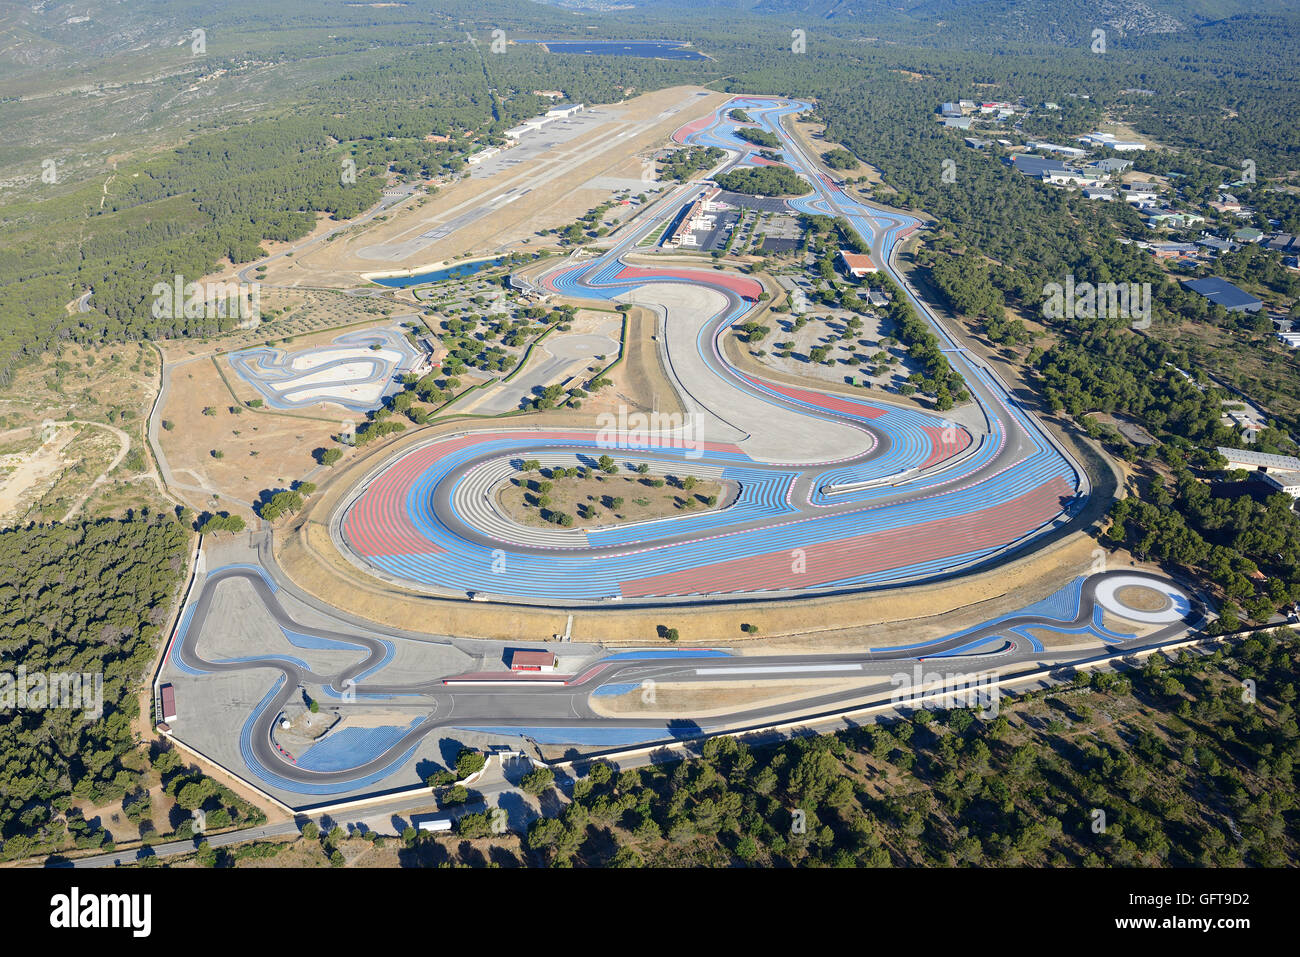 AERIAL VIEW. Le Castellet race track aka Paul Ricard race track with its blue and red run-off zones. Le Castellet, Var, Provence, France. Stock Photo